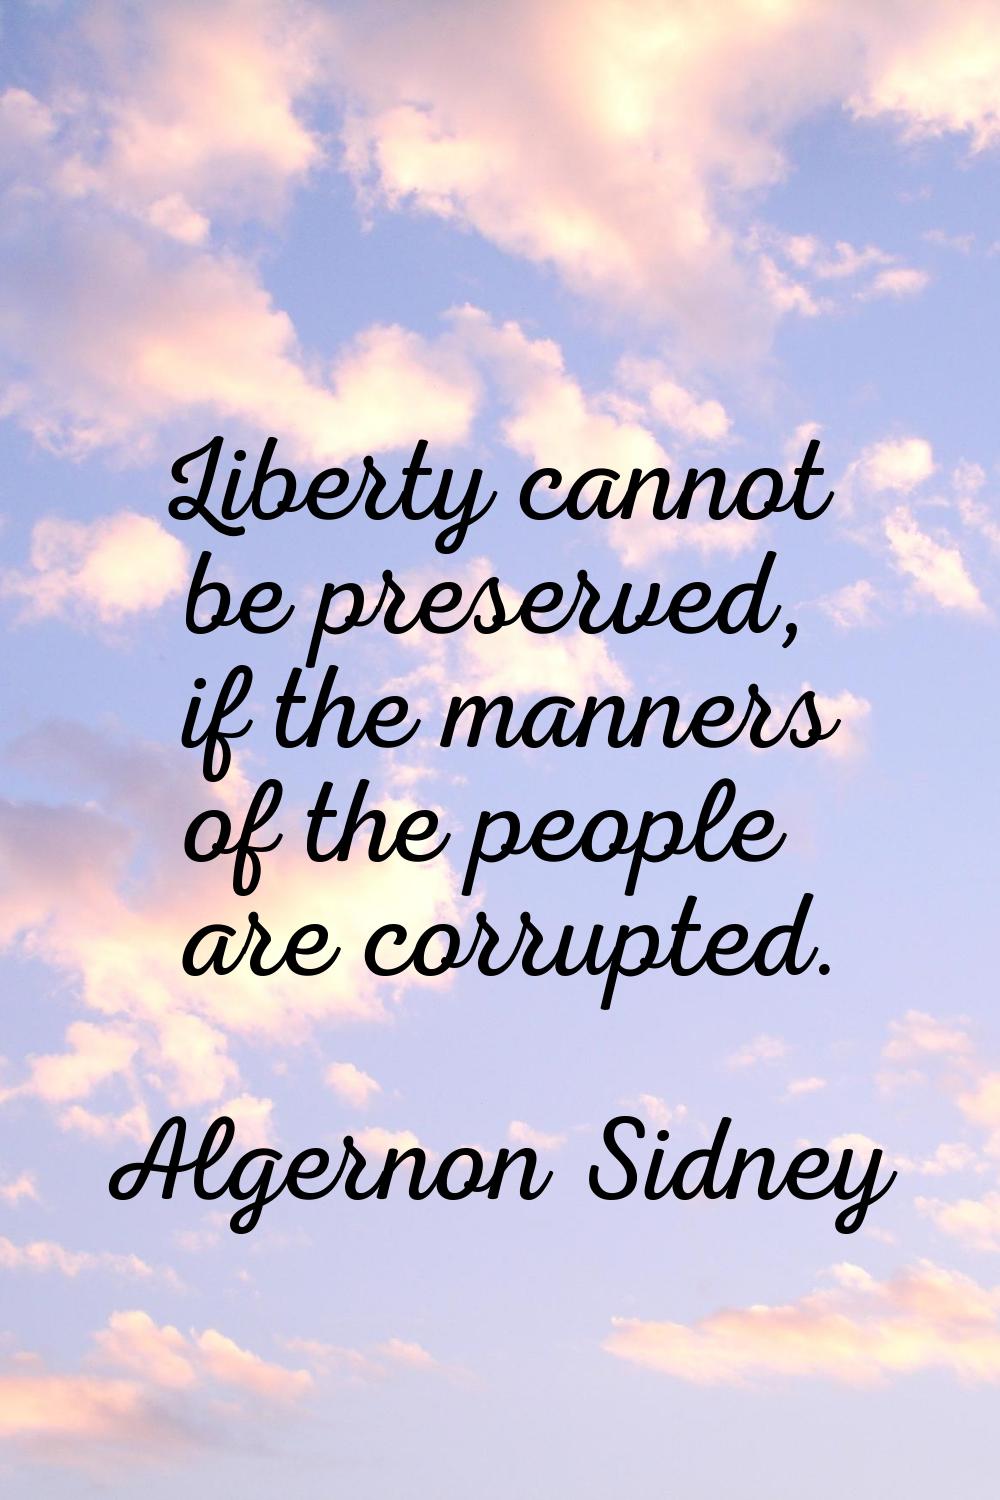 Liberty cannot be preserved, if the manners of the people are corrupted.